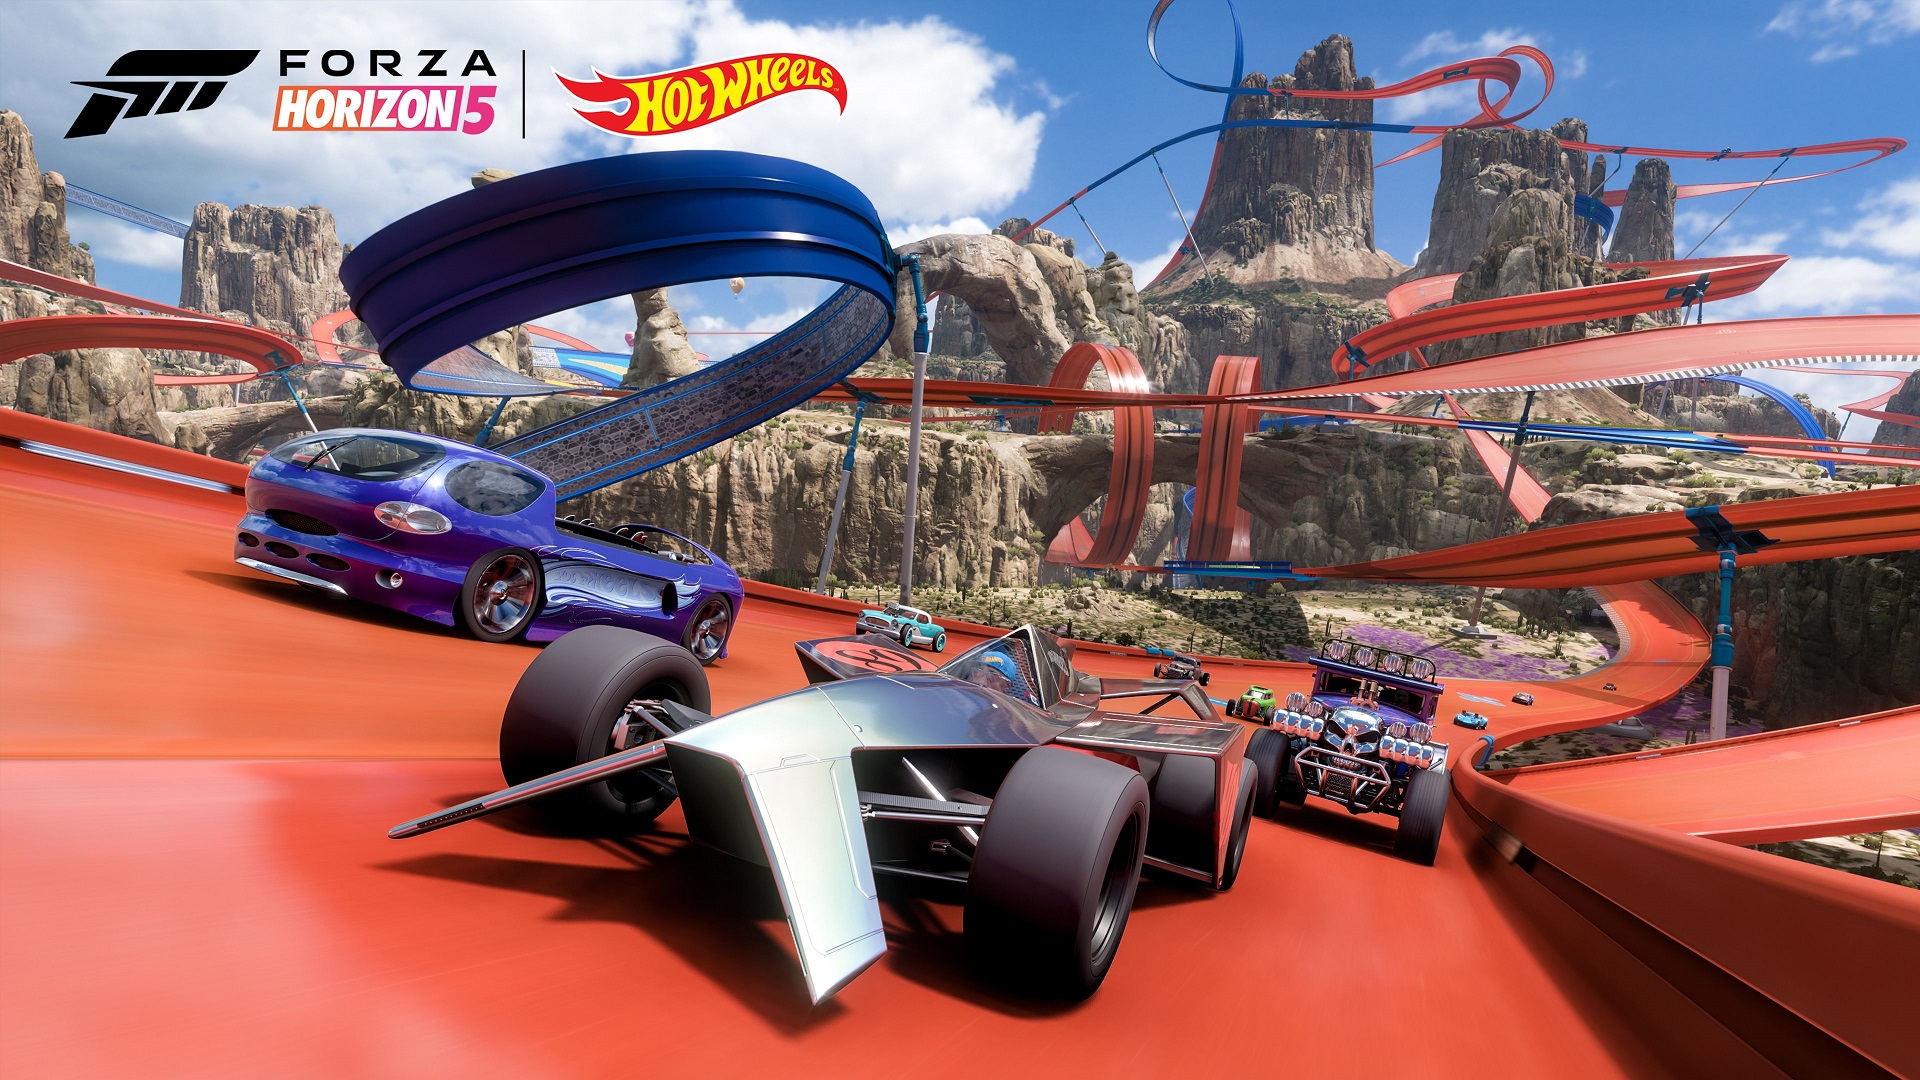 How Playground made Forza Horizon 5: Hot Wheels a wild ride for